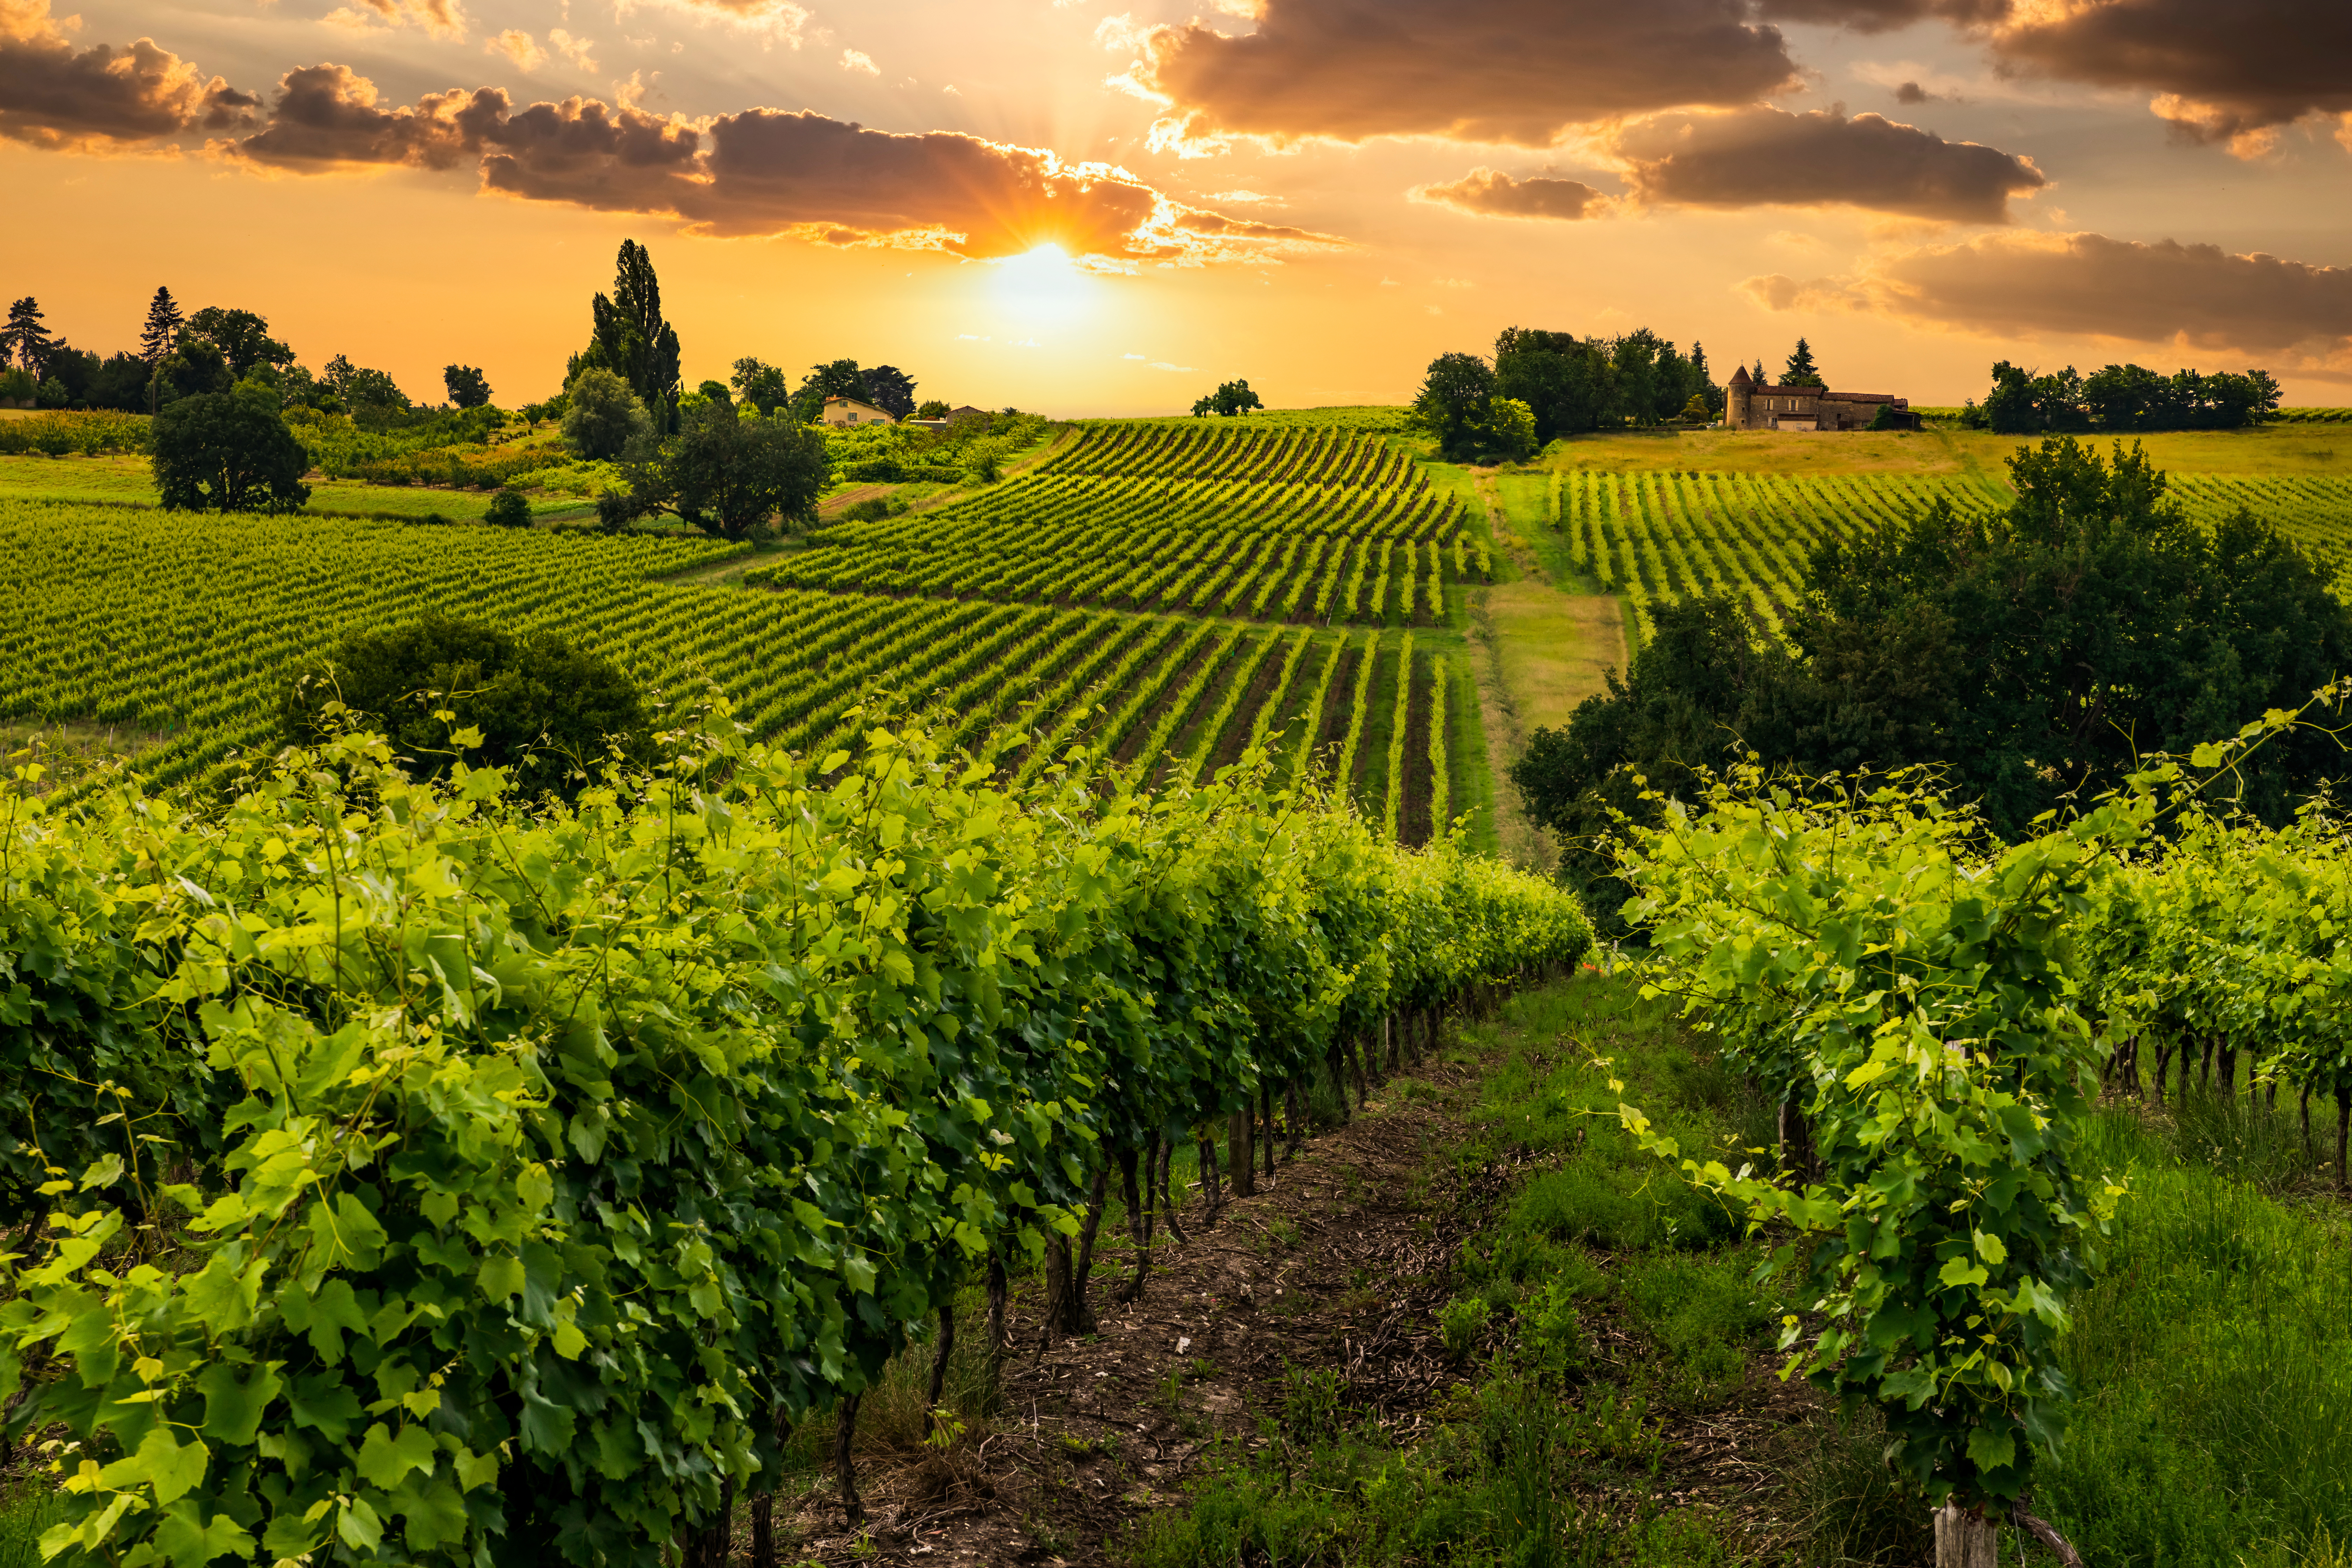 You could take a wine-fuelled tour through the vineyeard-rich region around Bordeaux